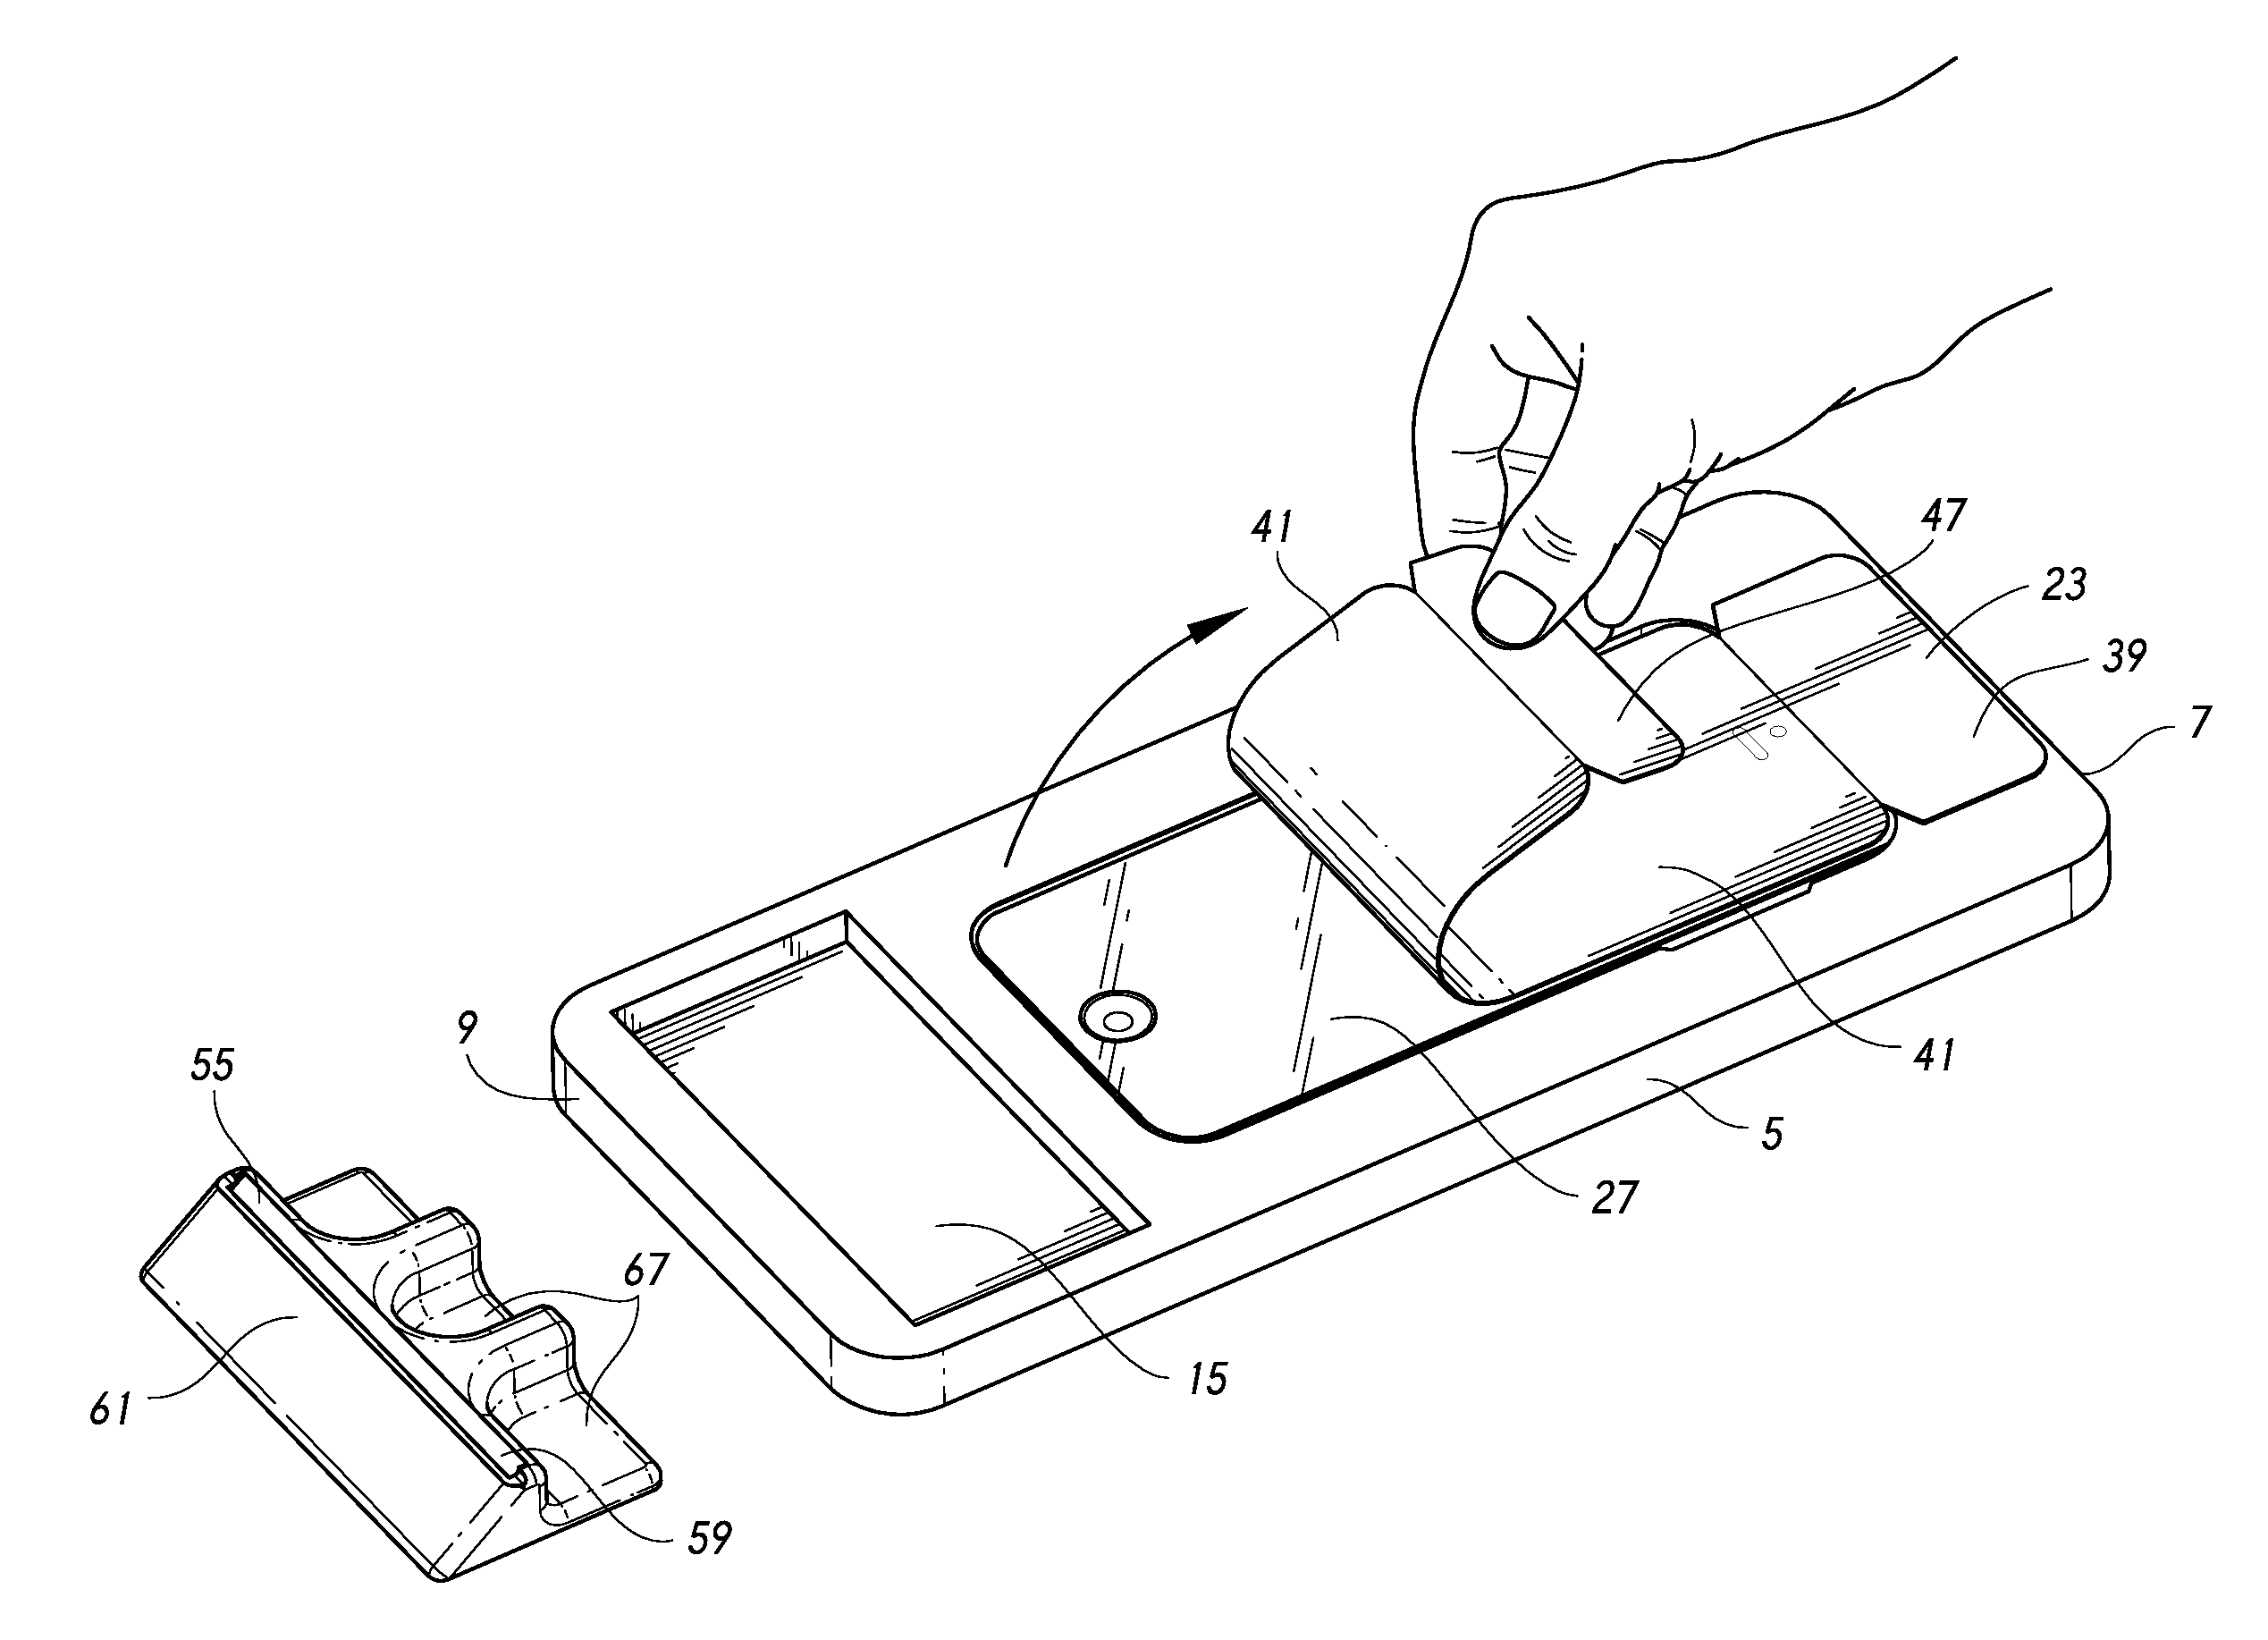 Applicator for applying protective coverings to electronic device displays